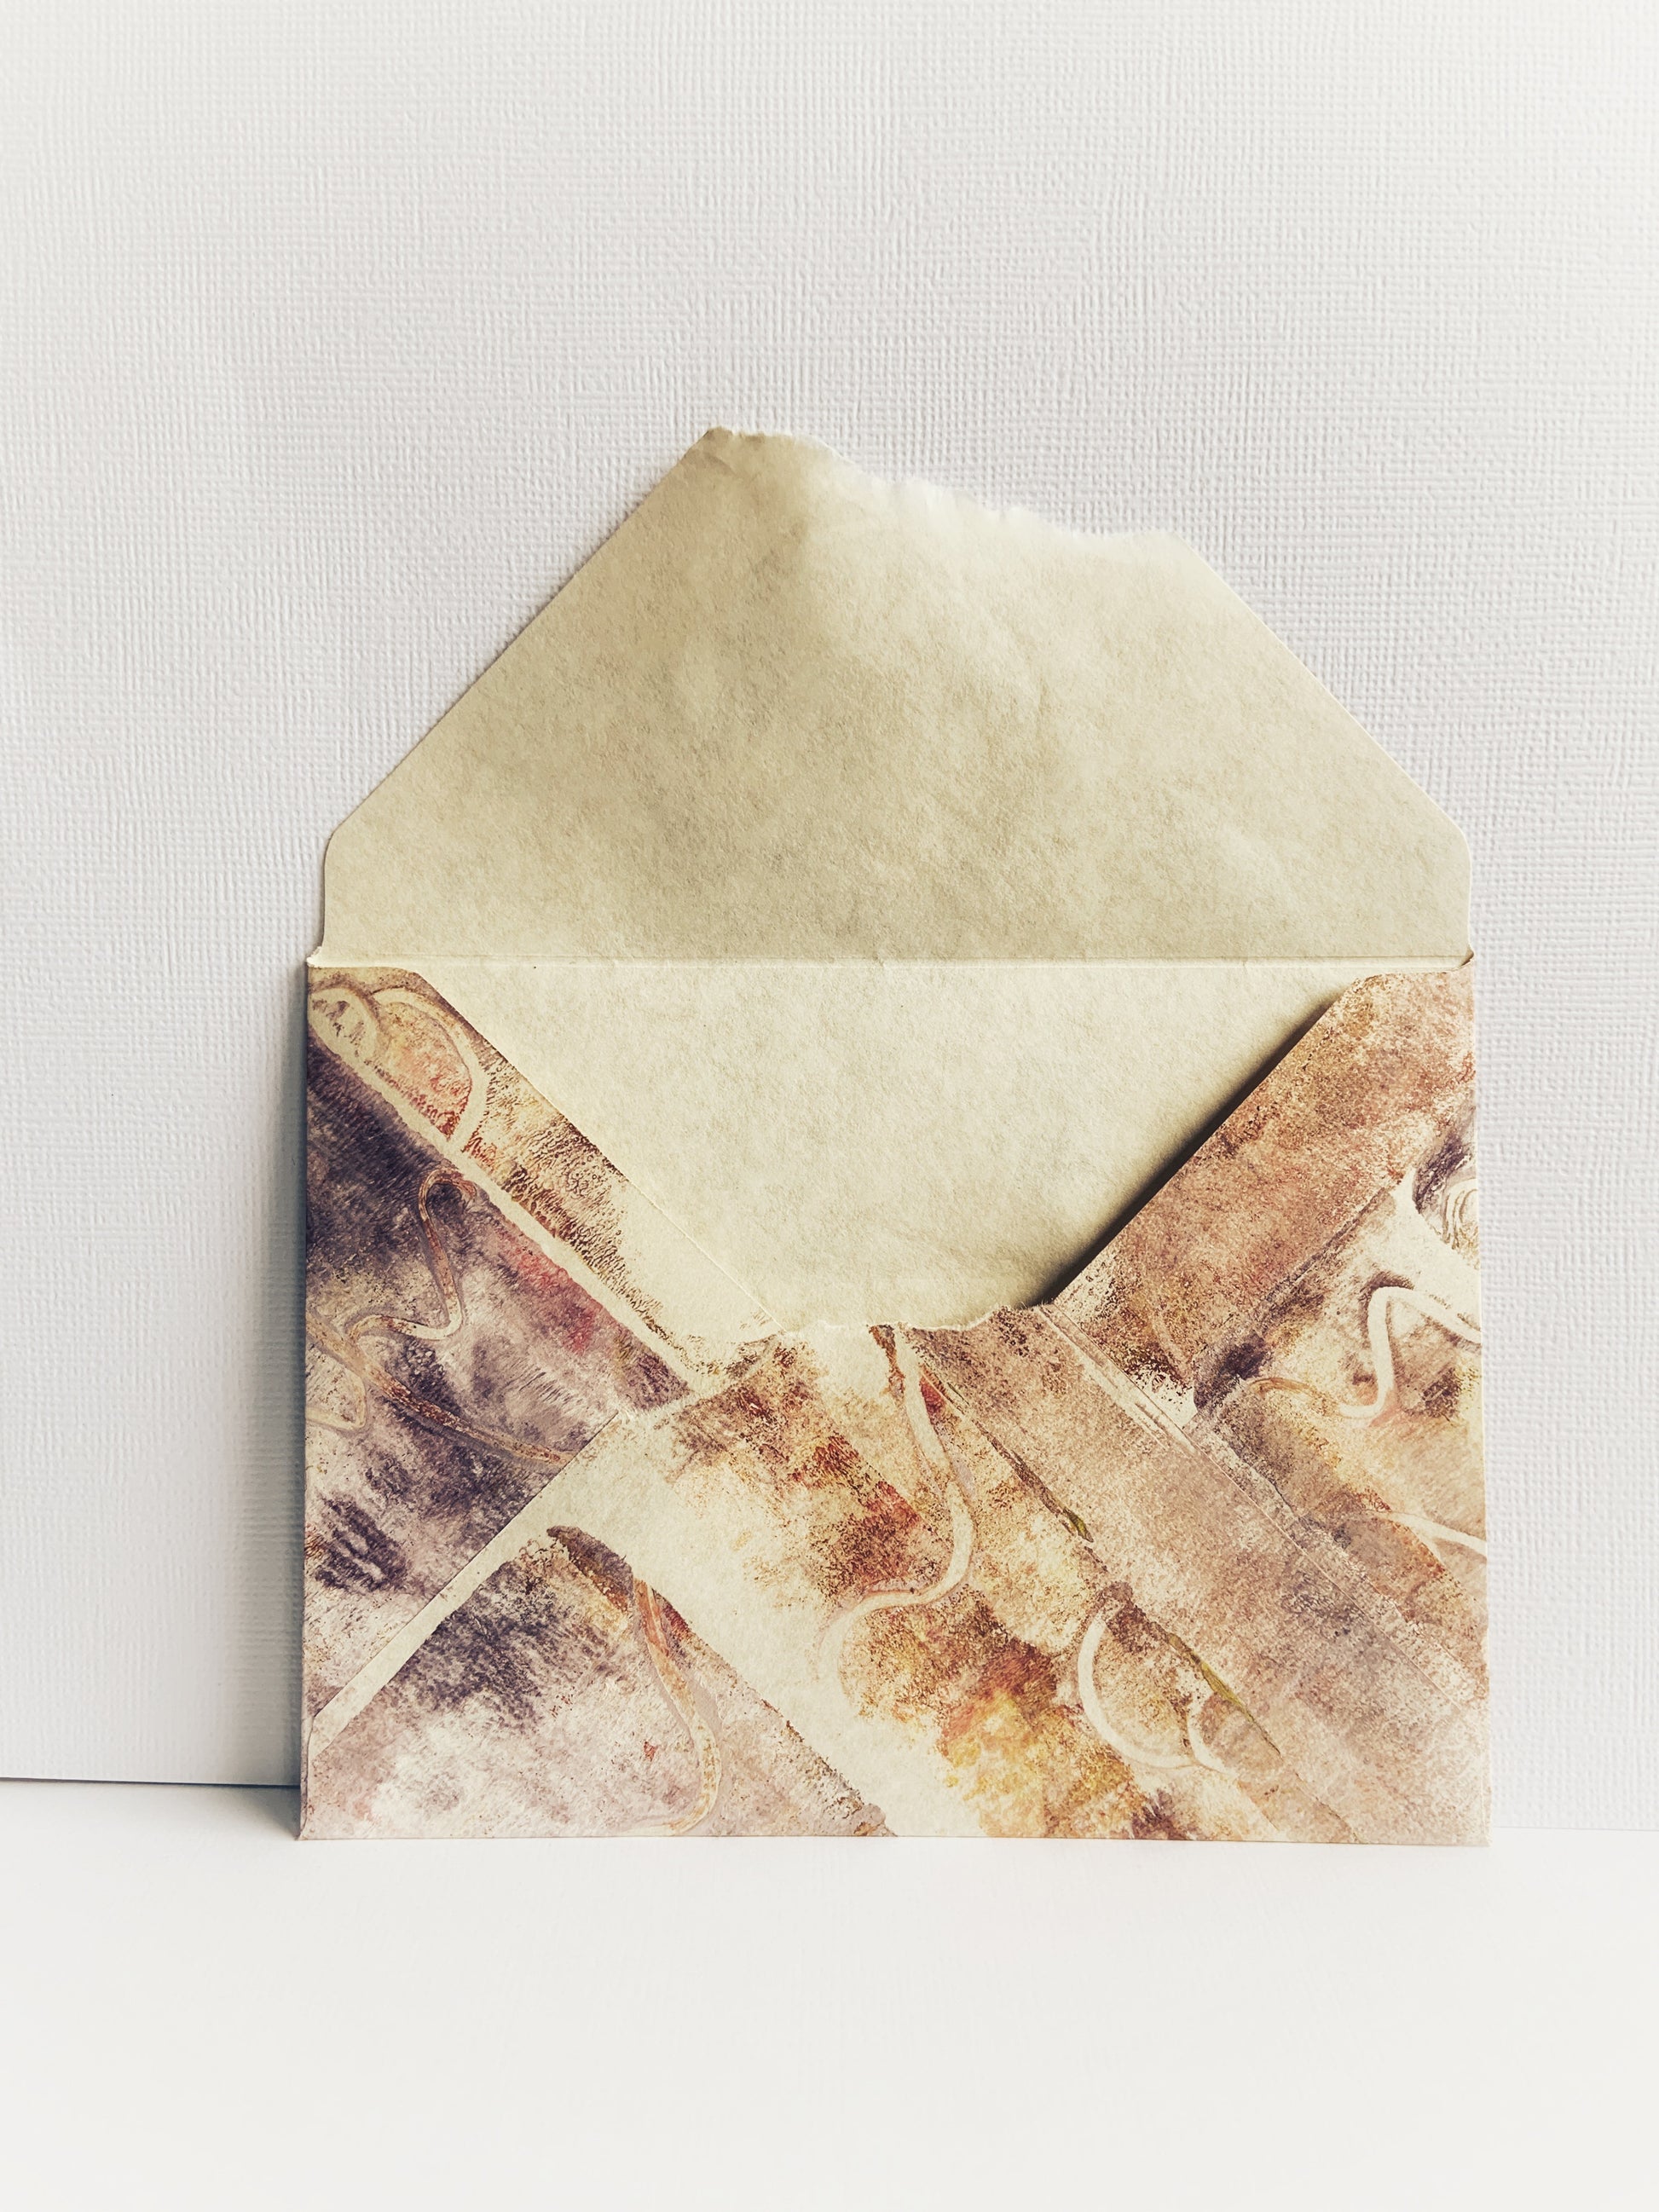 Back of a handmade envelope painted in muted brown and purple colors on natural-colored parchment paper with torn edge and flap